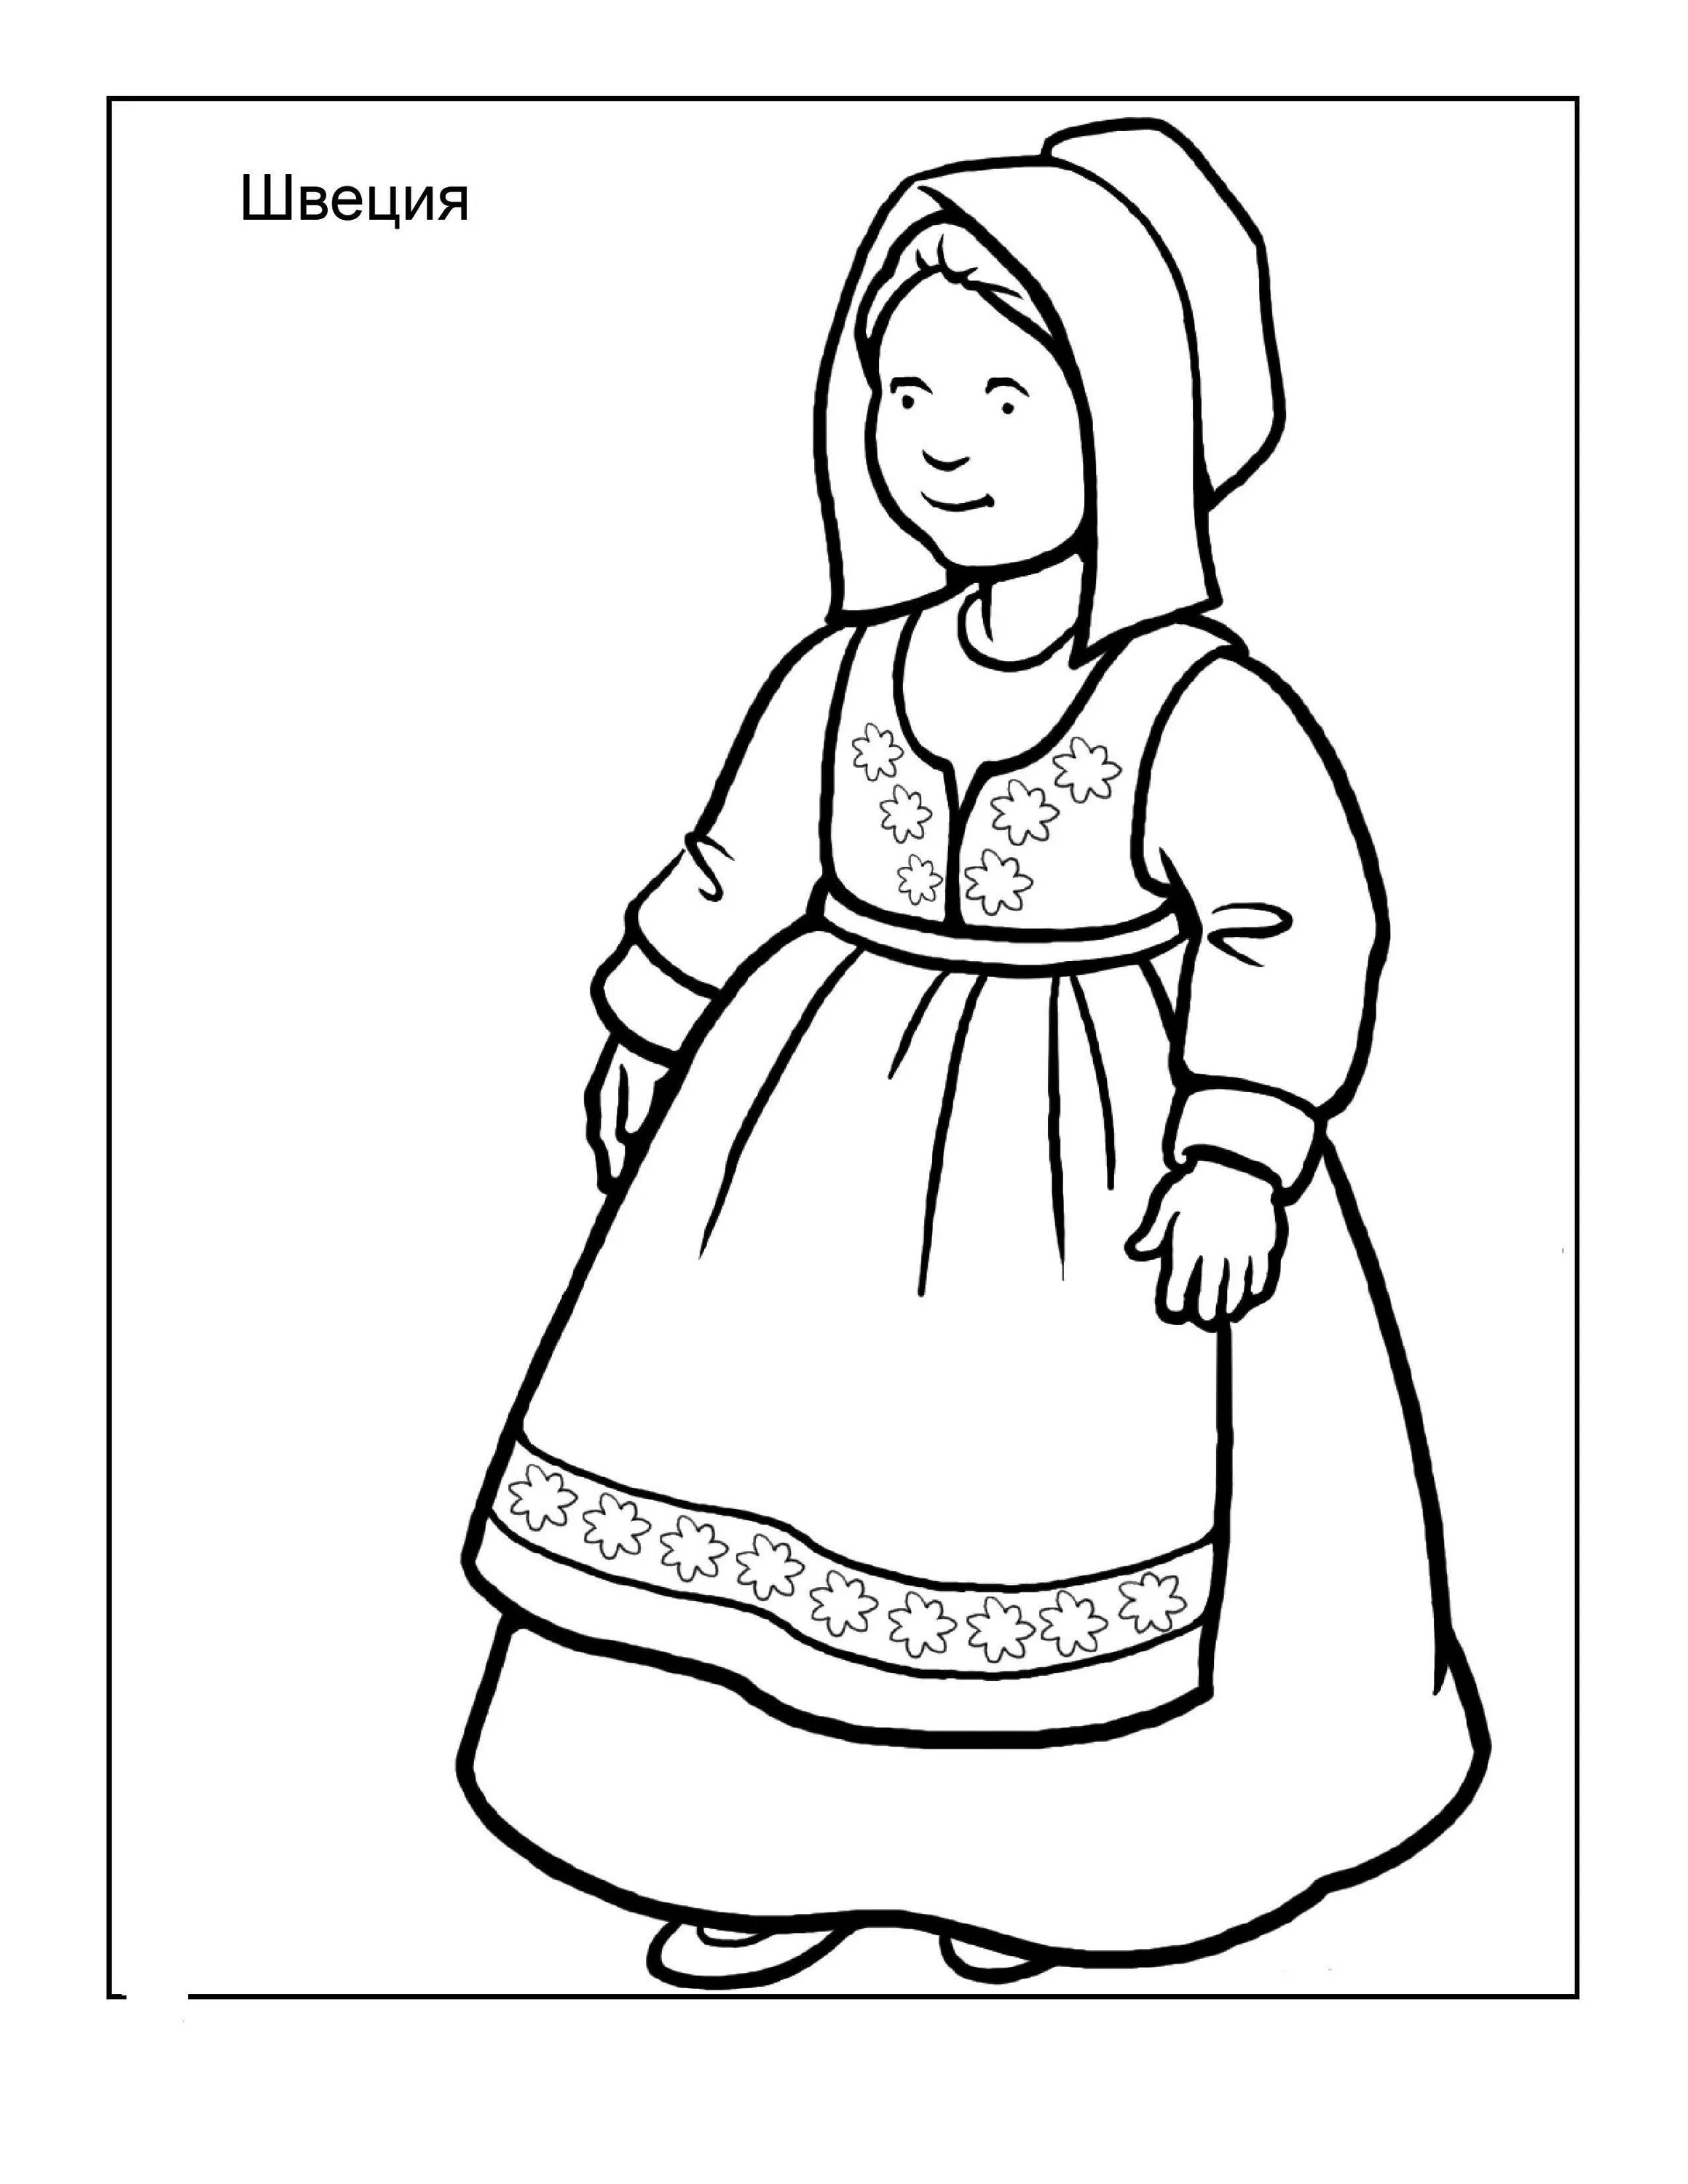 Coloring belarusian doll with color filling